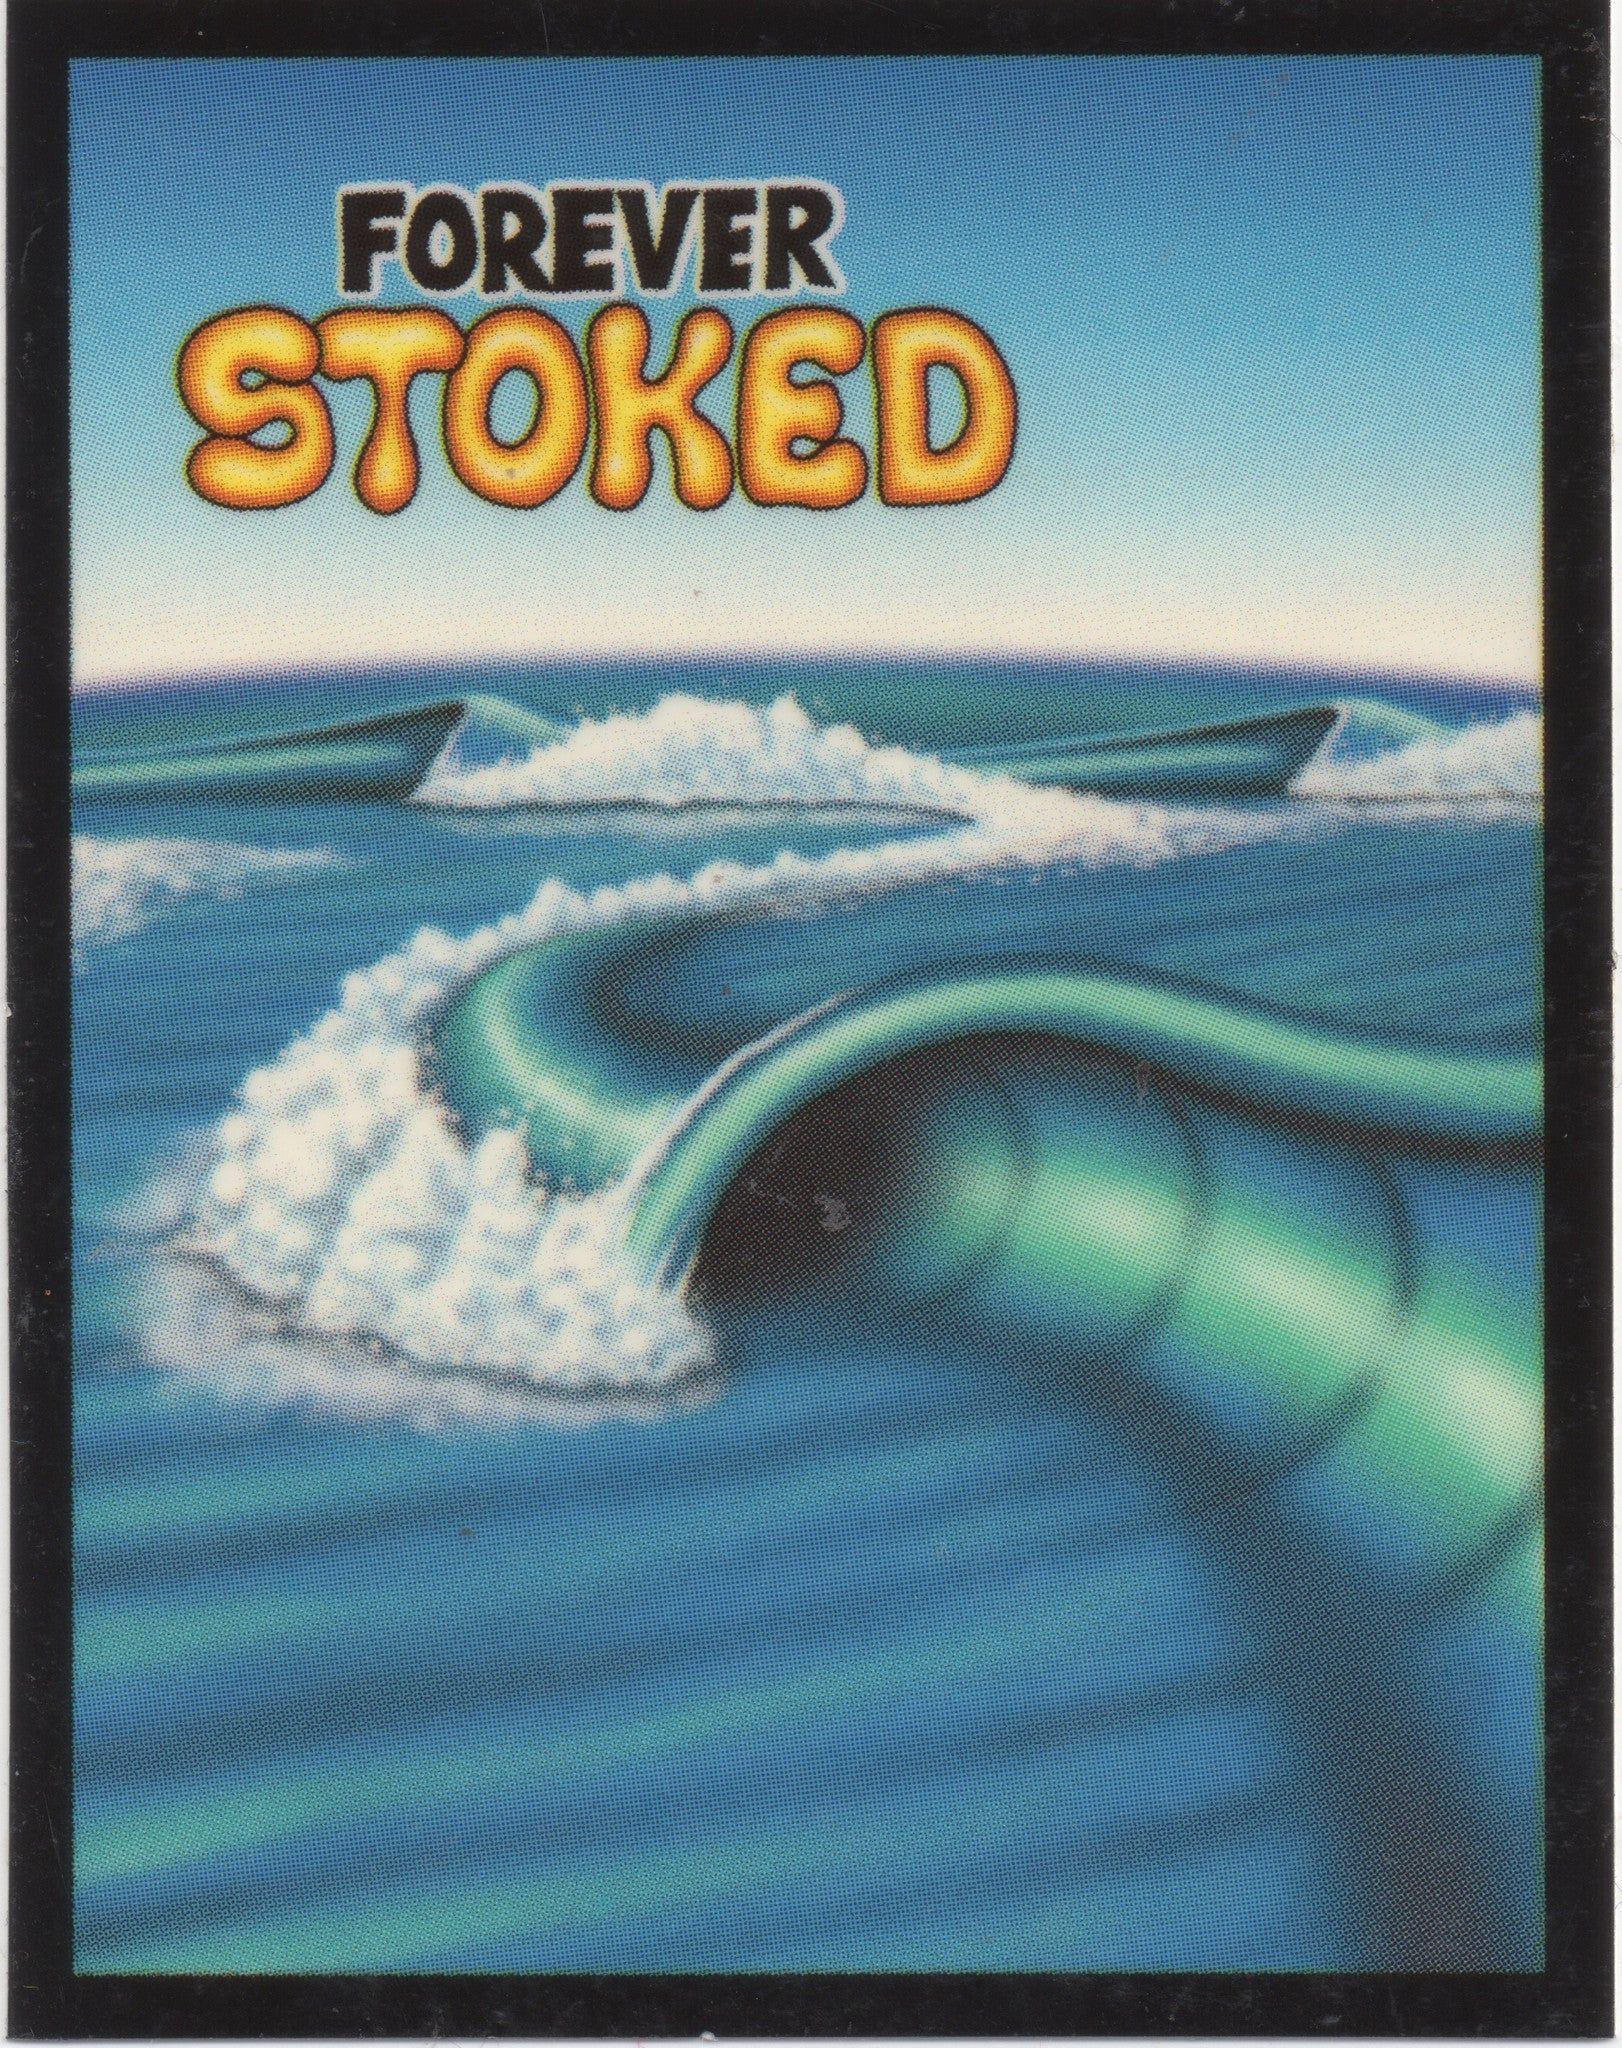 FS Left and Rights-Forever Stoked-curl,forever,scene,stoked,wave